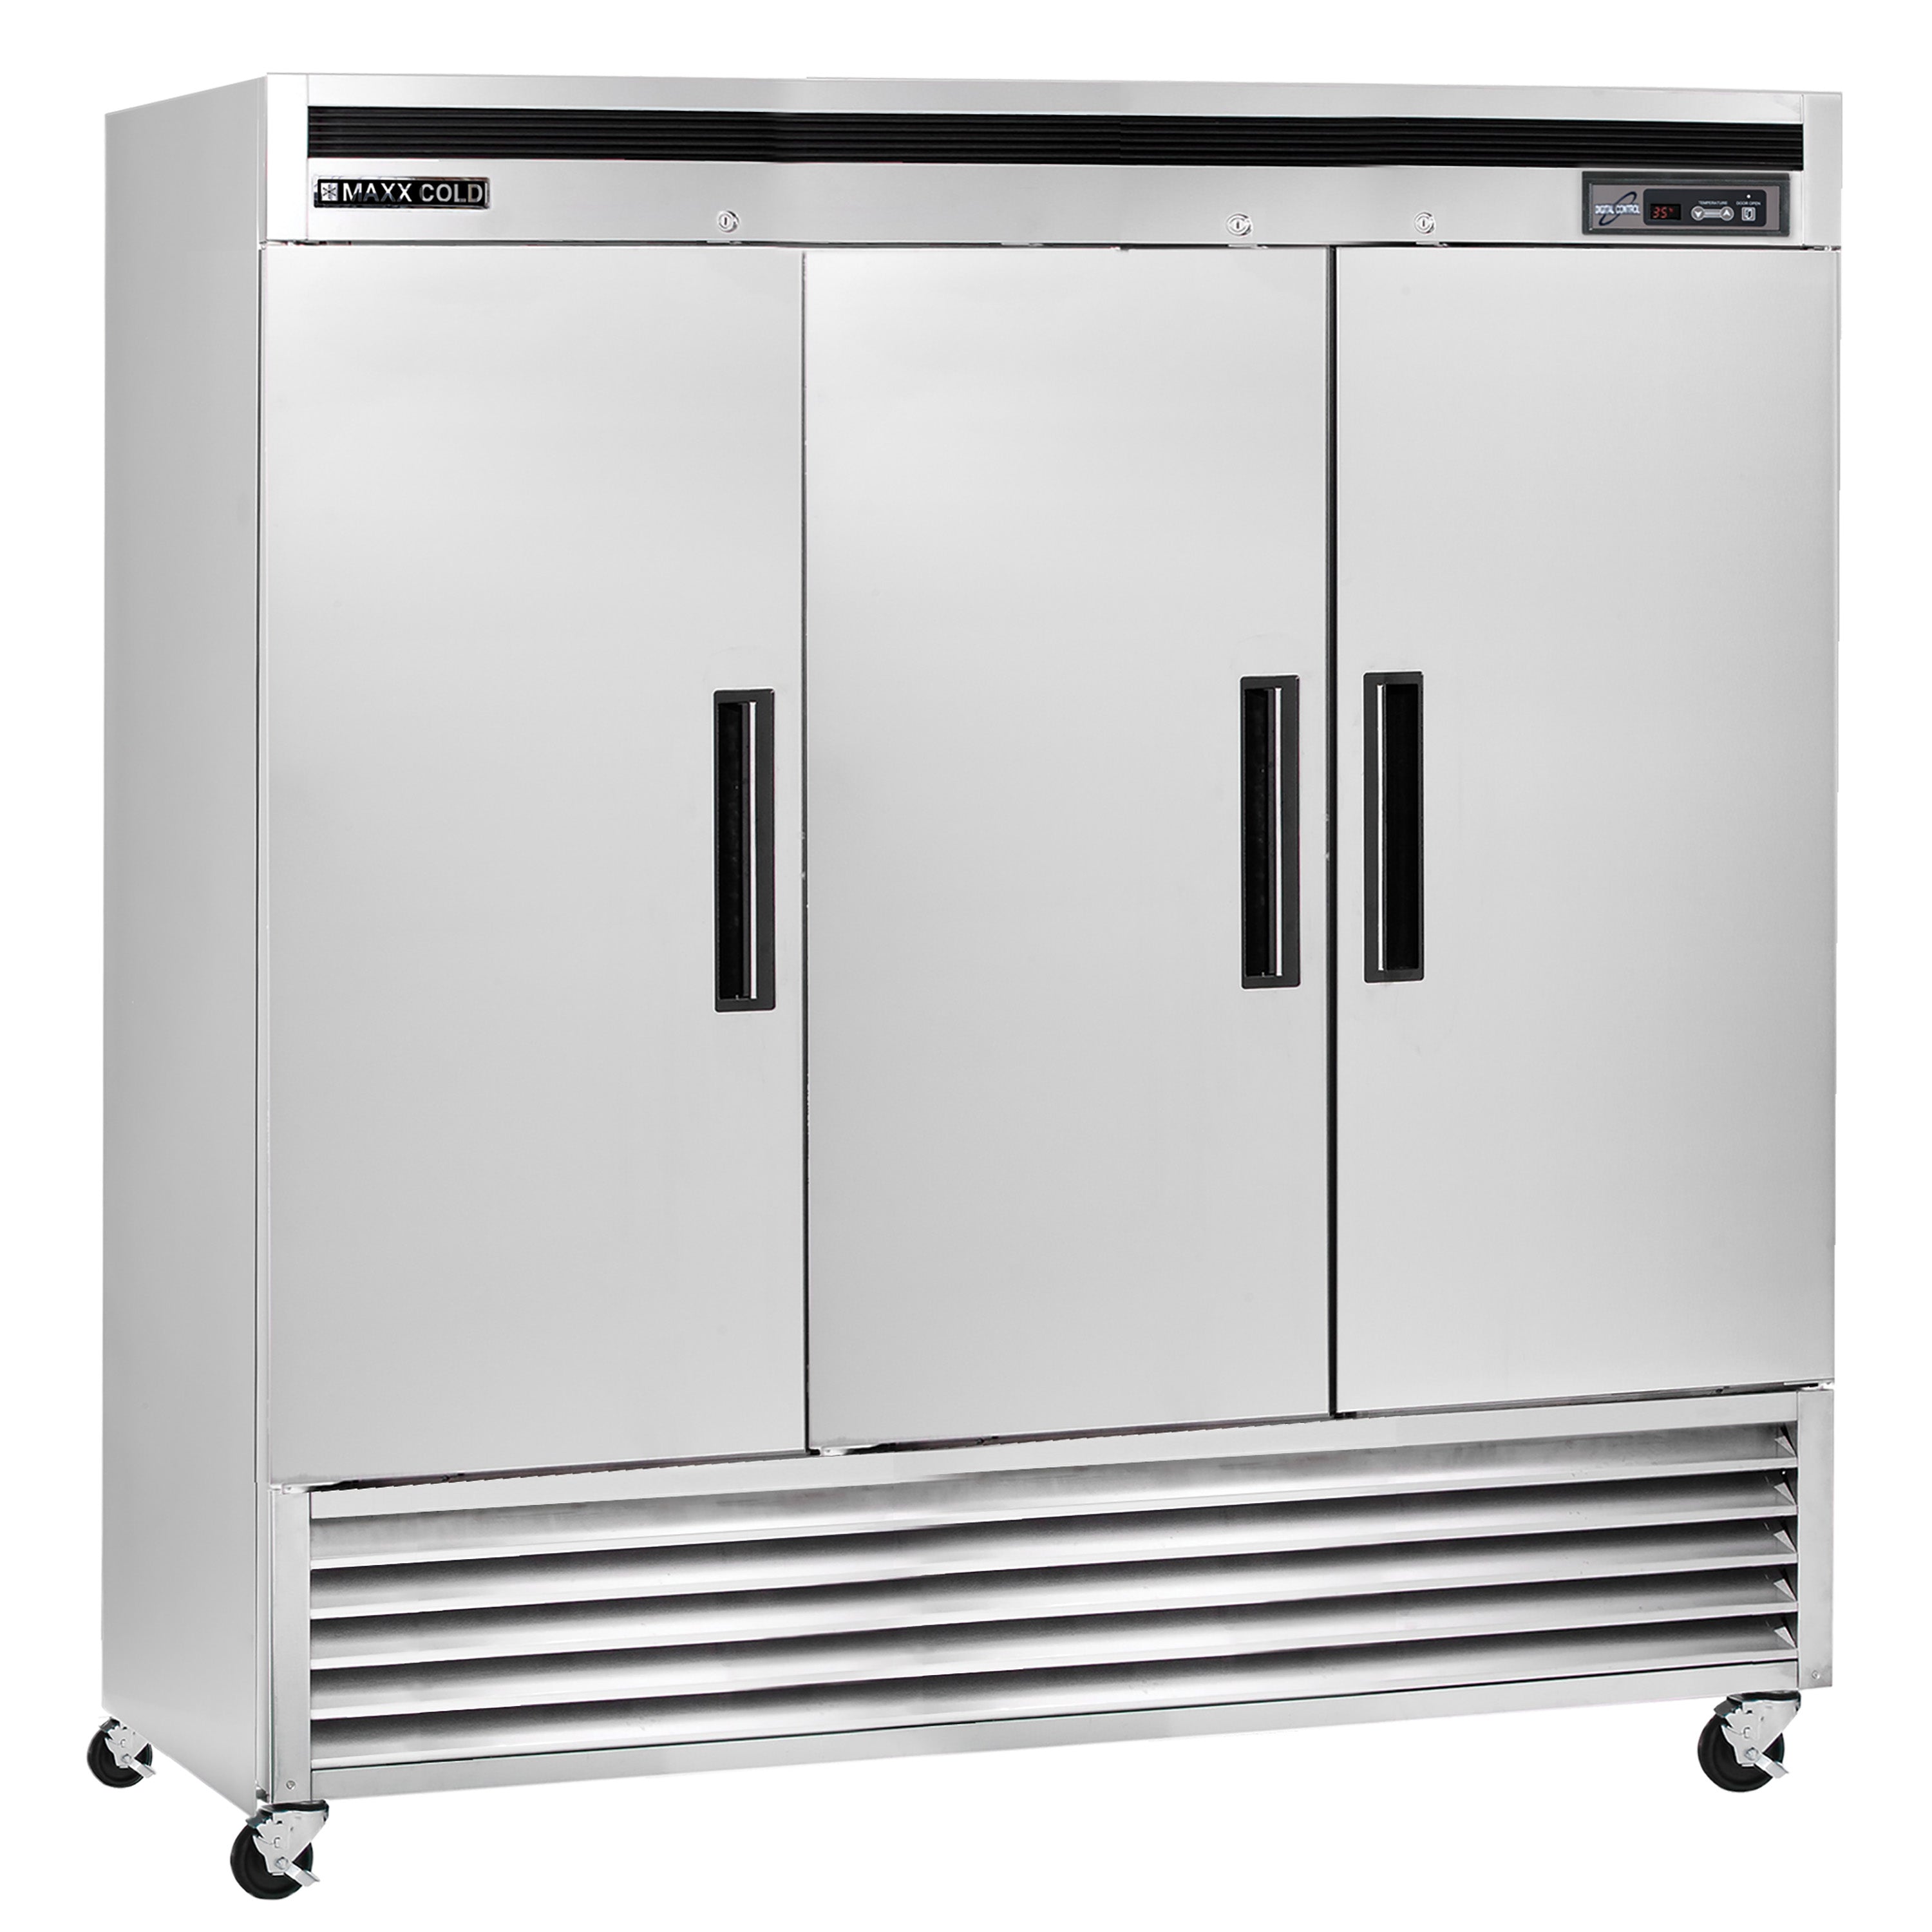 Maxx Cold - MCF-72FDHC, Maxx Cold Triple Door Reach-In Freezer, Bottom Mount, 81"W, 72 cu. ft. Storage Capacity, Energy Star Rated, in Stainless Steel